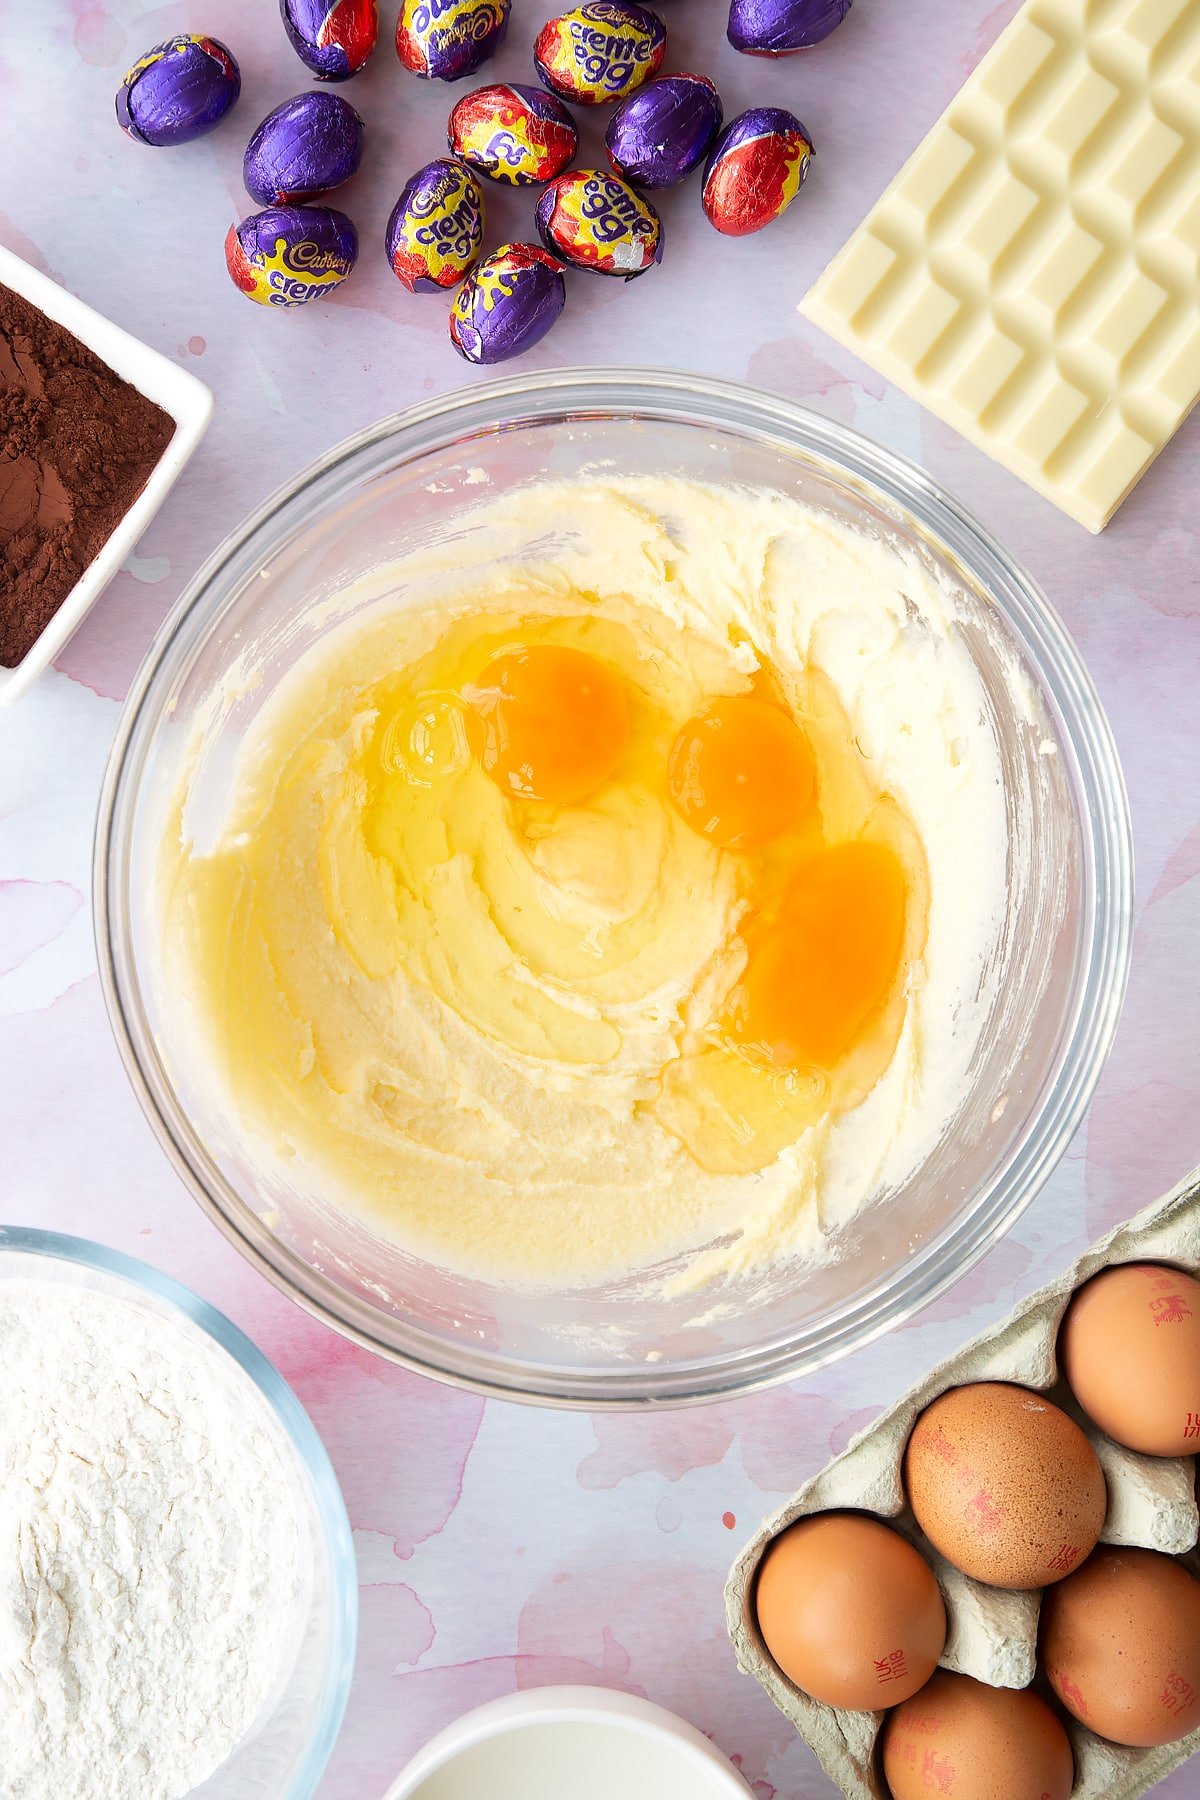 Butter and sugar creamed together in a bowl with eggs on top. Ingredients to make Cadbury Creme Egg cakes surround the bowl.